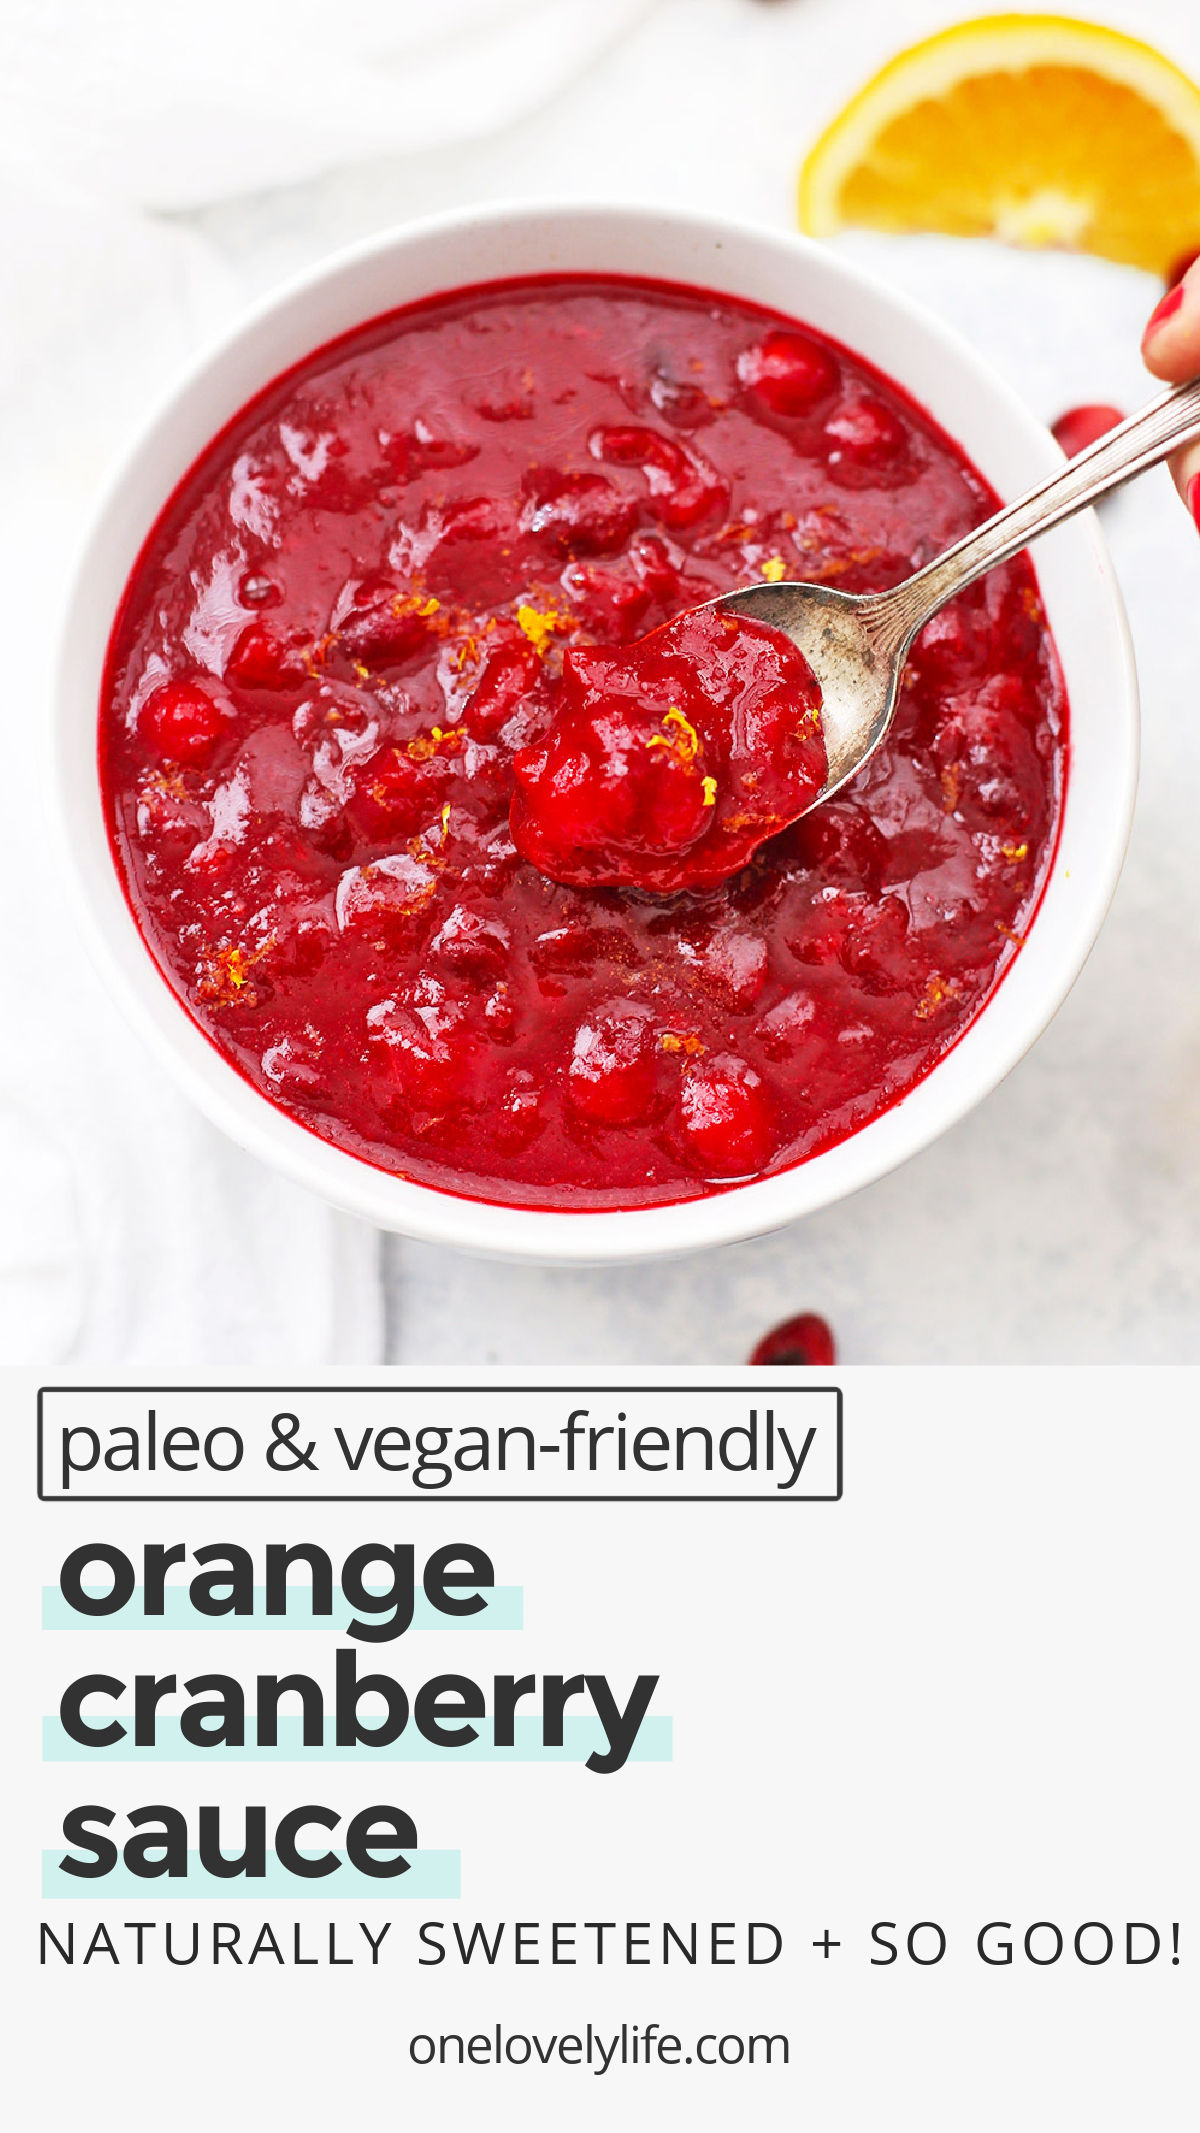 Orange Honey Cranberry Sauce - This paleo cranberry sauce can also easily be made vegan. With bright citrus notes and a hint of cinnamon, this naturally sweetened cranberry sauce is the perfect addition to the holiday table. // orange cranberry sauce recipe // Paleo thanksgiving // vegan thanksgiving // gluten-free thanksgiving #cranberrysauce #paleo #vegan #glutenfree